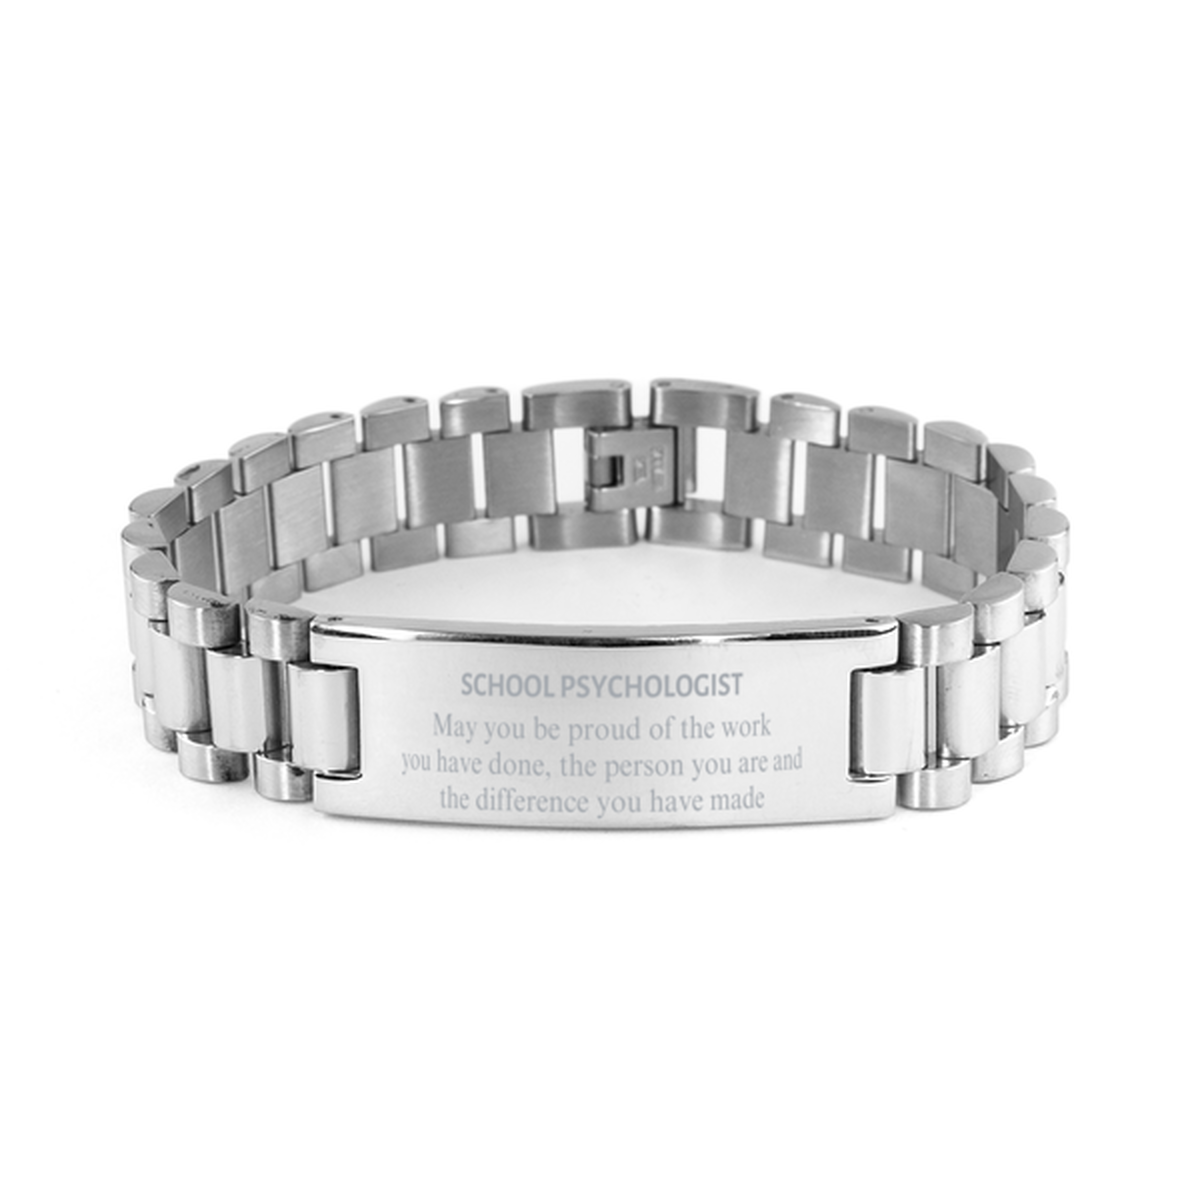 School Psychologist May you be proud of the work you have done, Retirement School Psychologist Ladder Stainless Steel Bracelet for Colleague Appreciation Gifts Amazing for School Psychologist